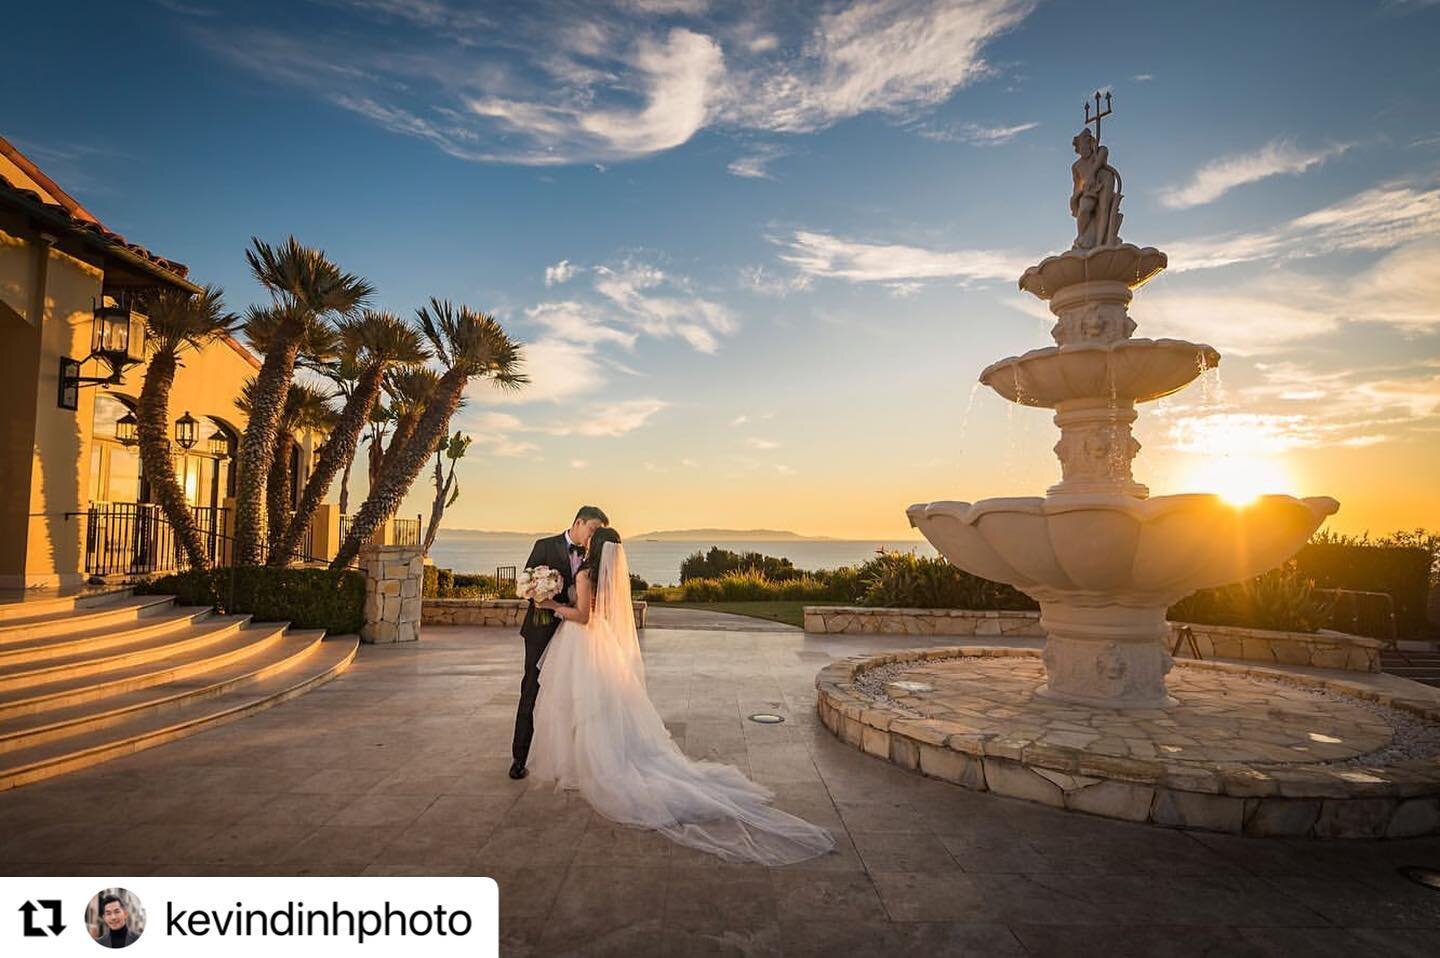 Beautiful couple with a stunning view. Hair &amp; Makeup @juliejungmakeup Thank you @kevindinhphoto for the amazing photos.